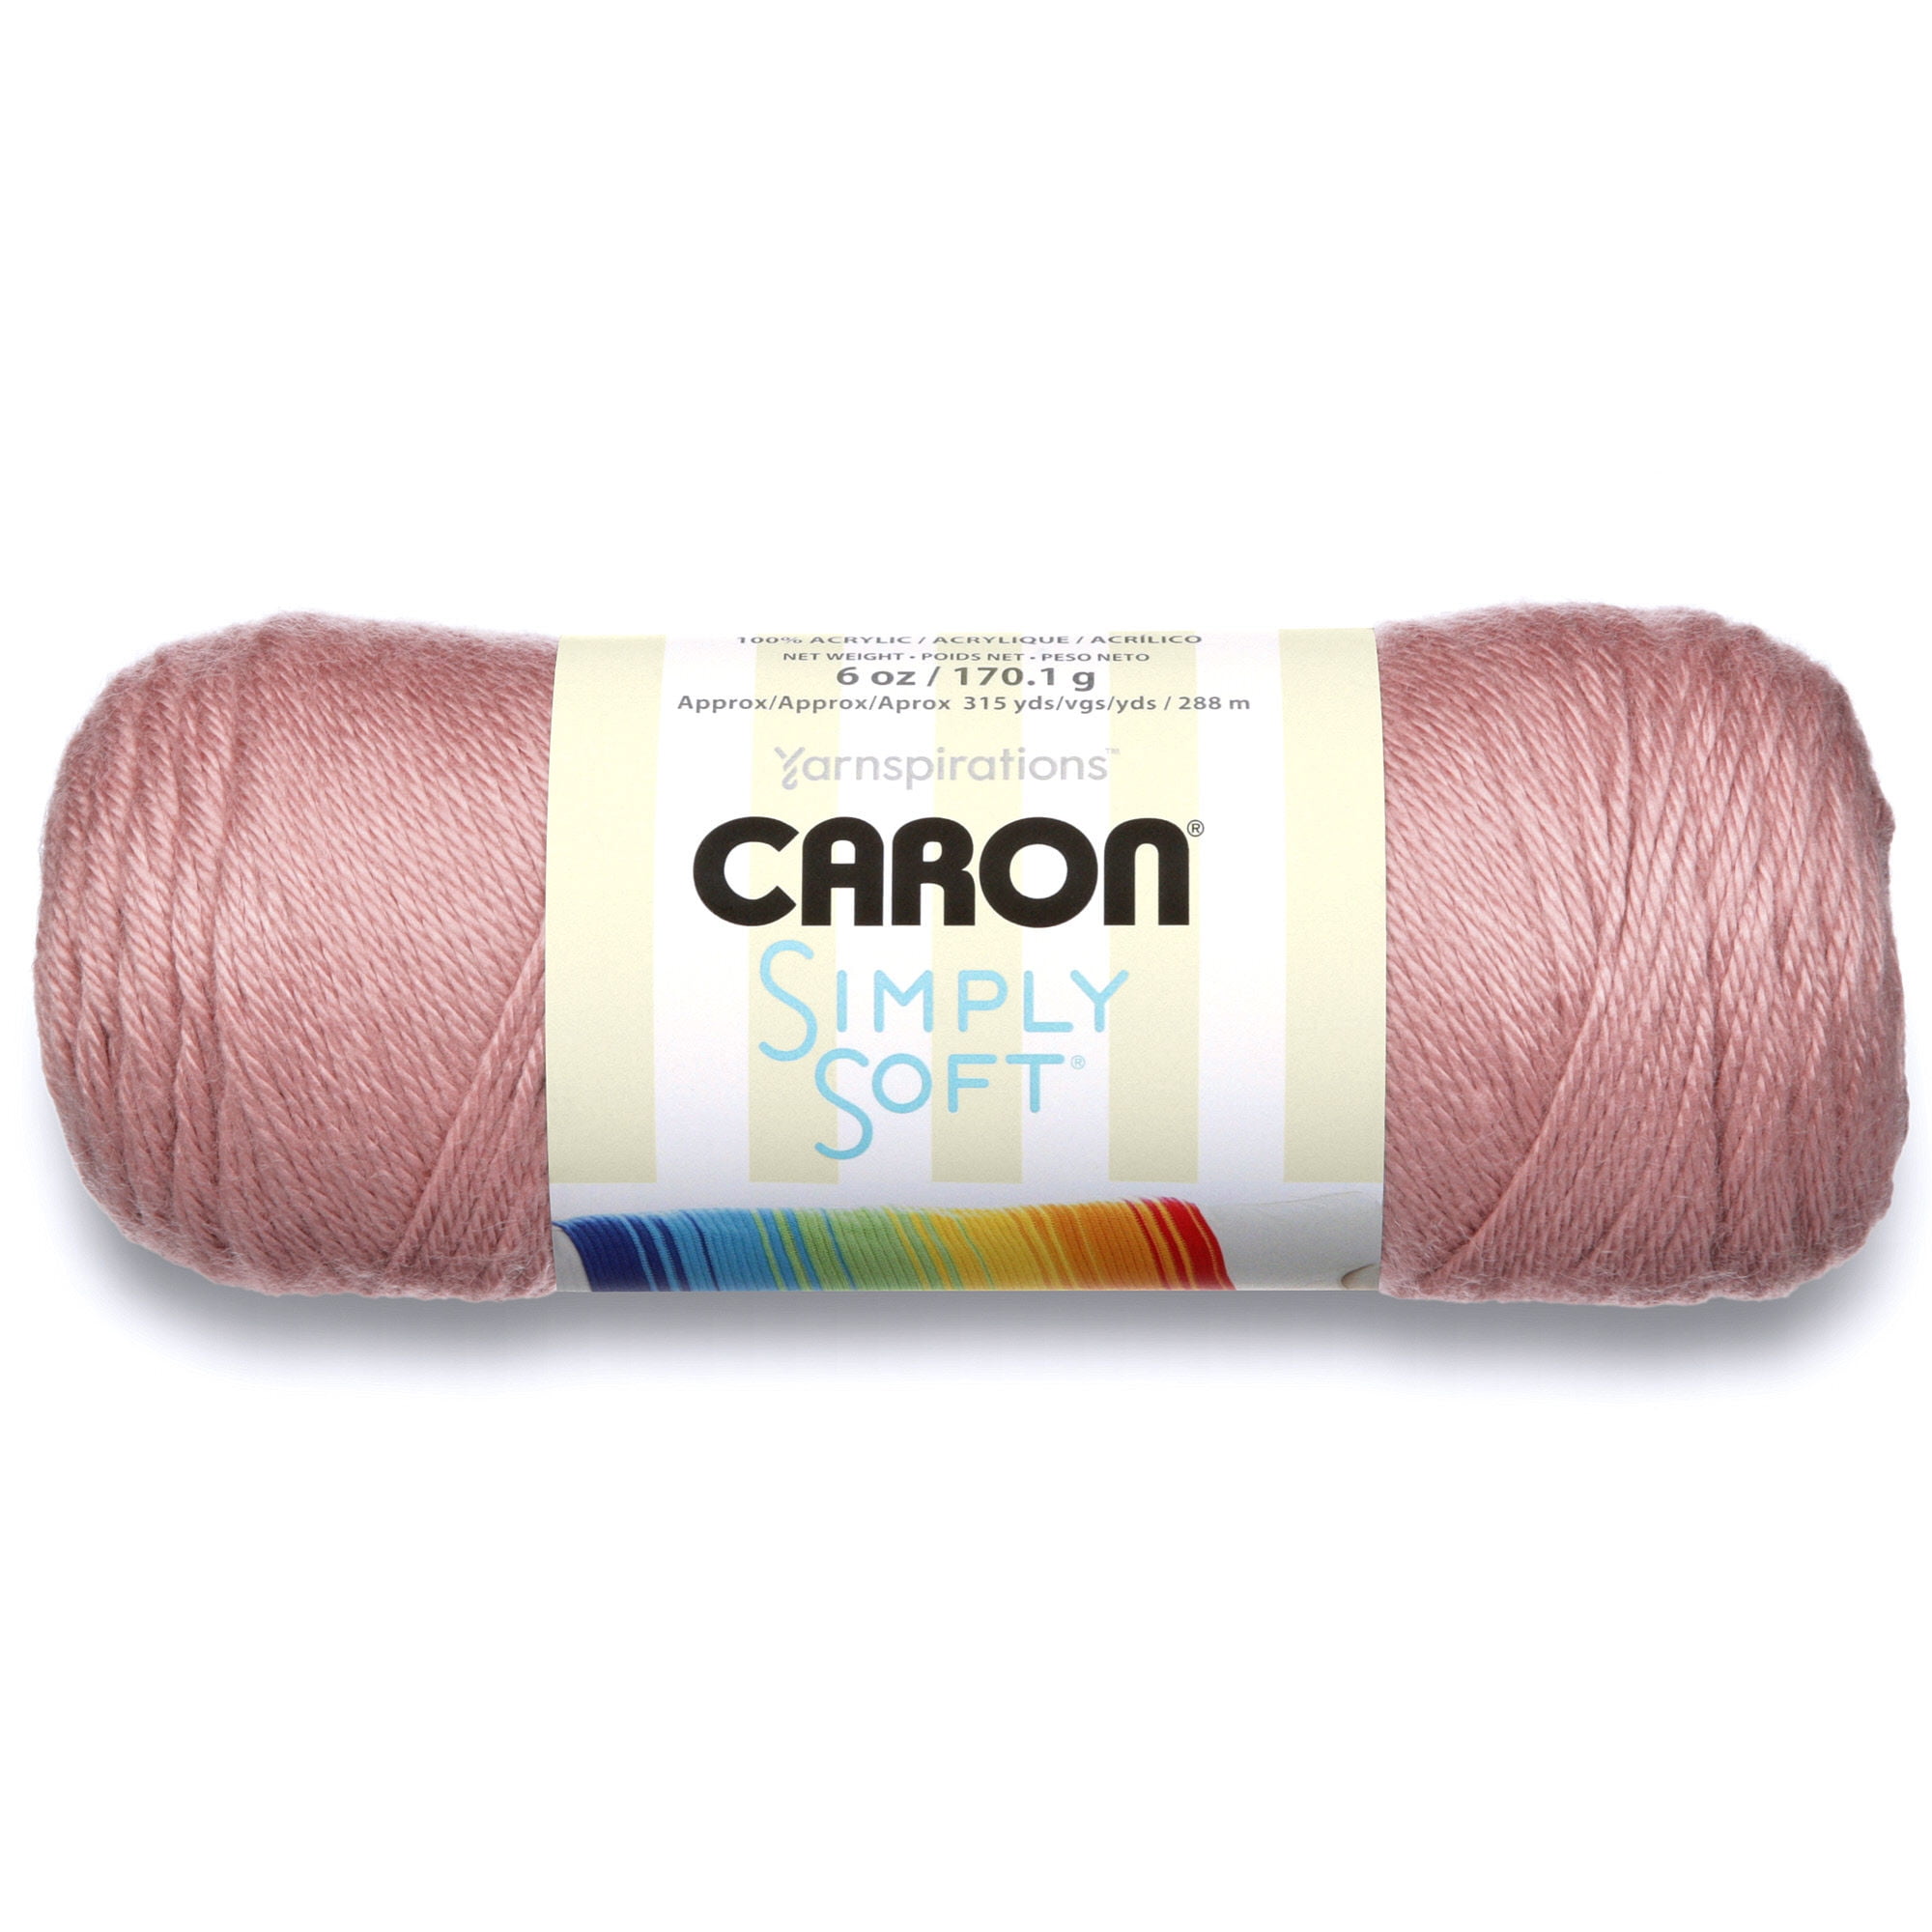 Lot of 2 Skeins CARON Simply Soft Yarn White 9701 Acrylic Worsted